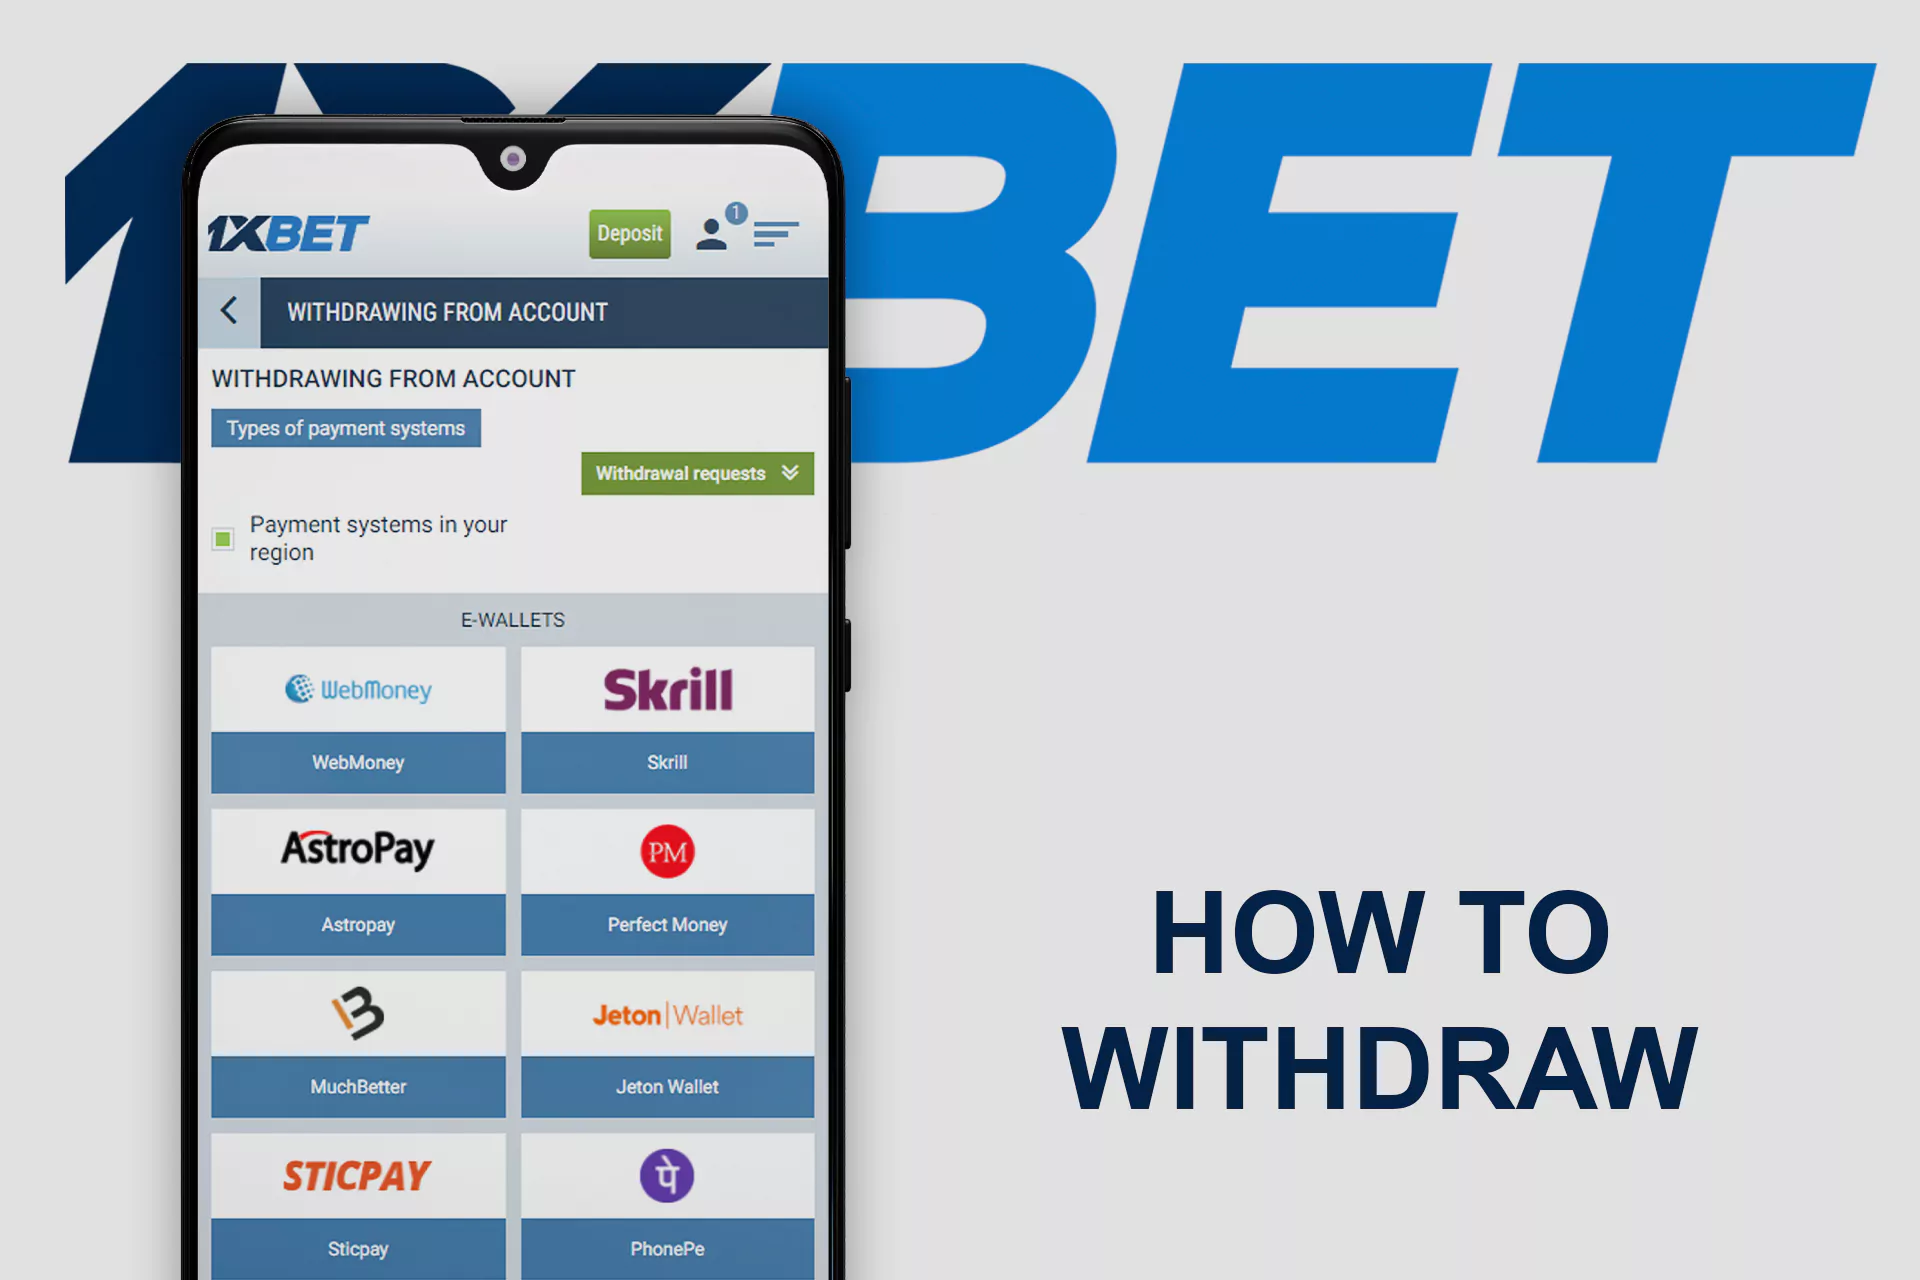 You can withdraw money through the 1xBet app.